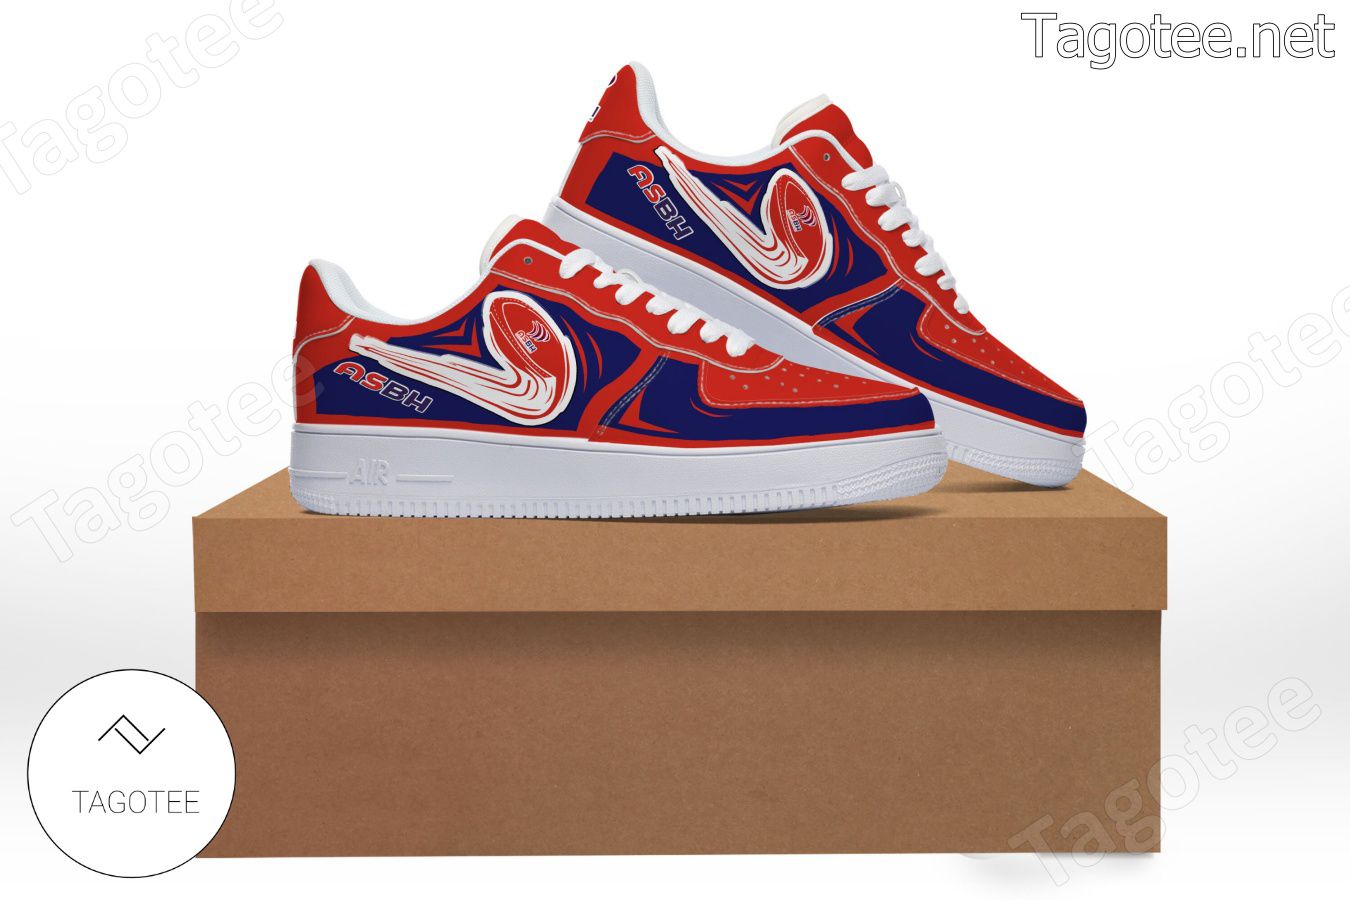 AS Beziers Herault Logo Air Force 1 Shoes